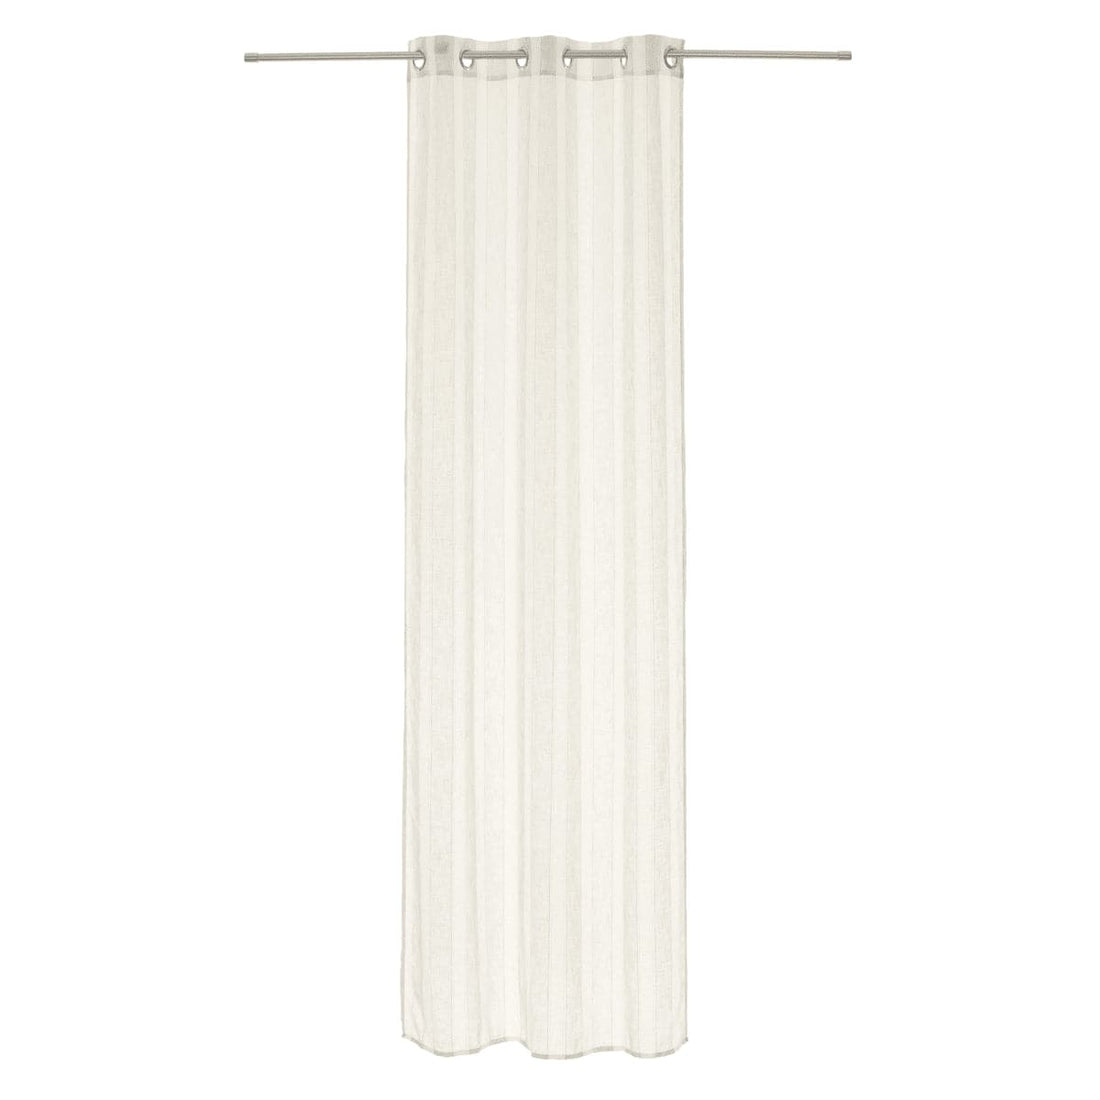 VANESSA GREY STONE FILTER CURTAIN 140X280 WITH EYELETS - best price from Maltashopper.com BR480007440